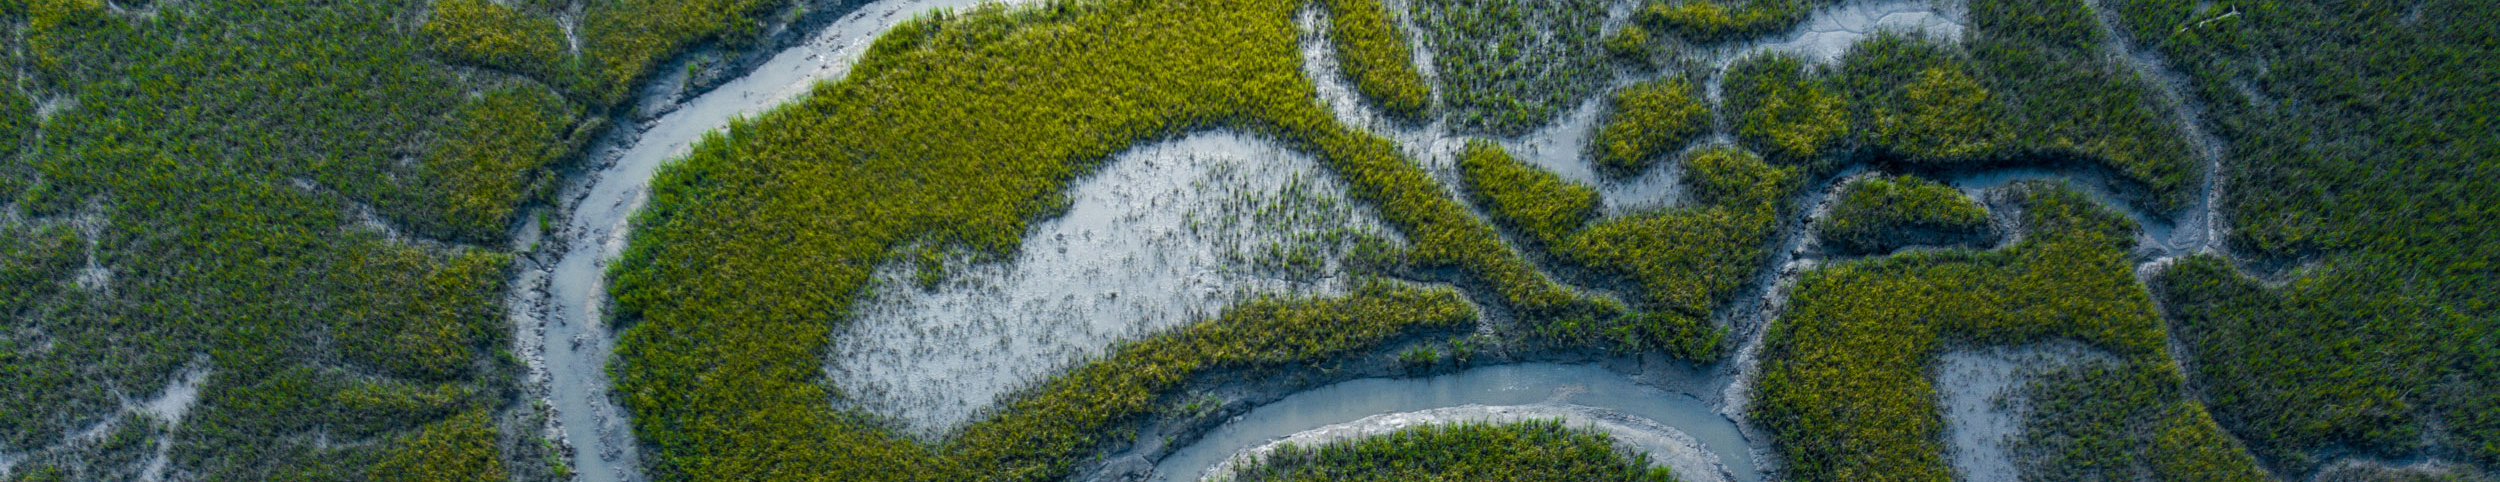 A winding tidal creek surrounded by green marshland viewed from above.